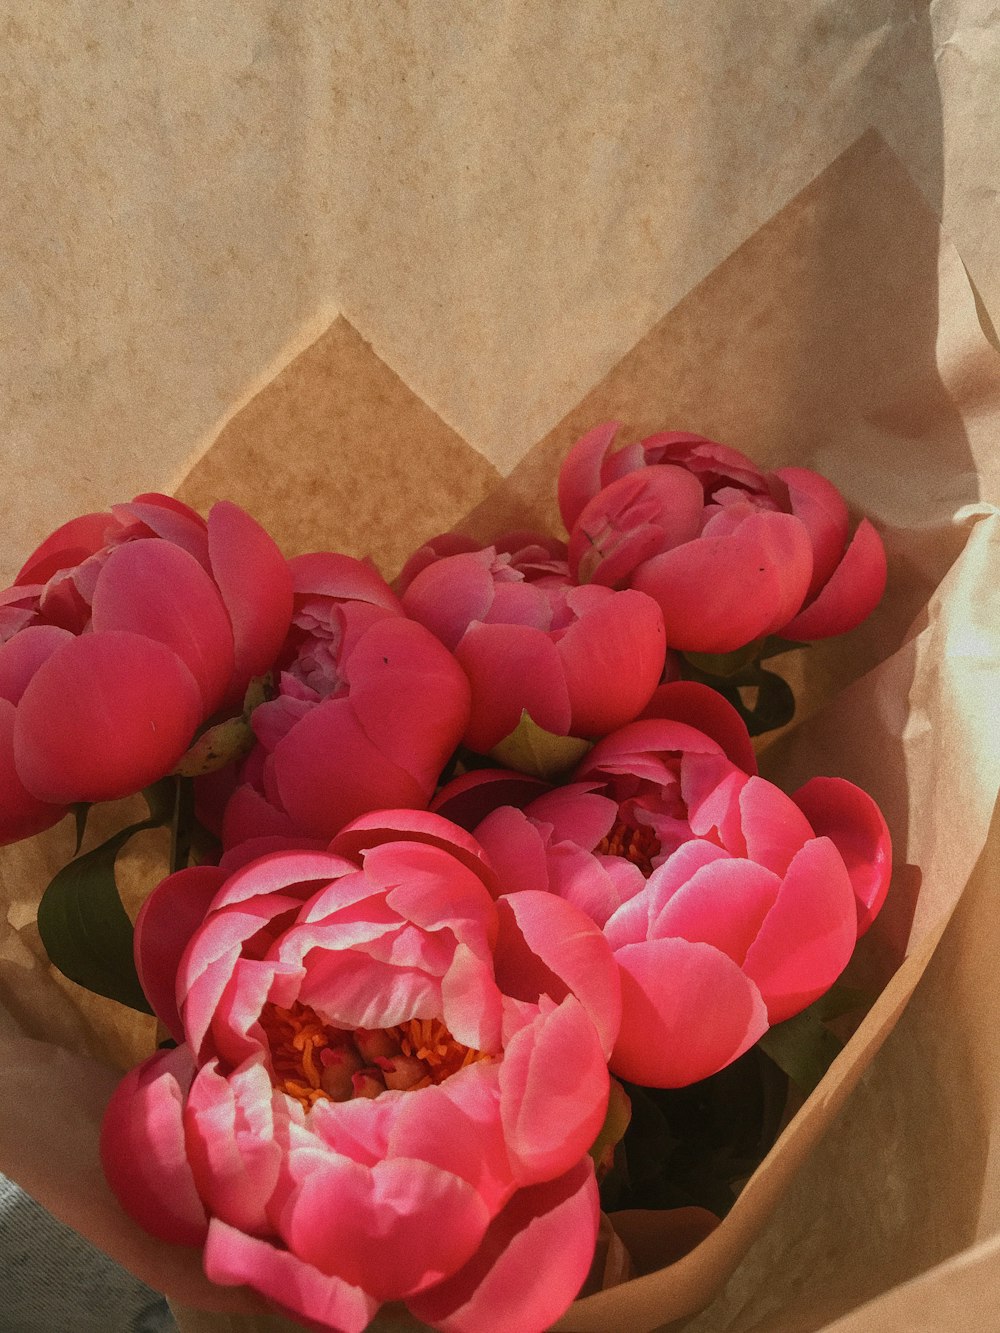 pink rose bouquet in brown paper bag